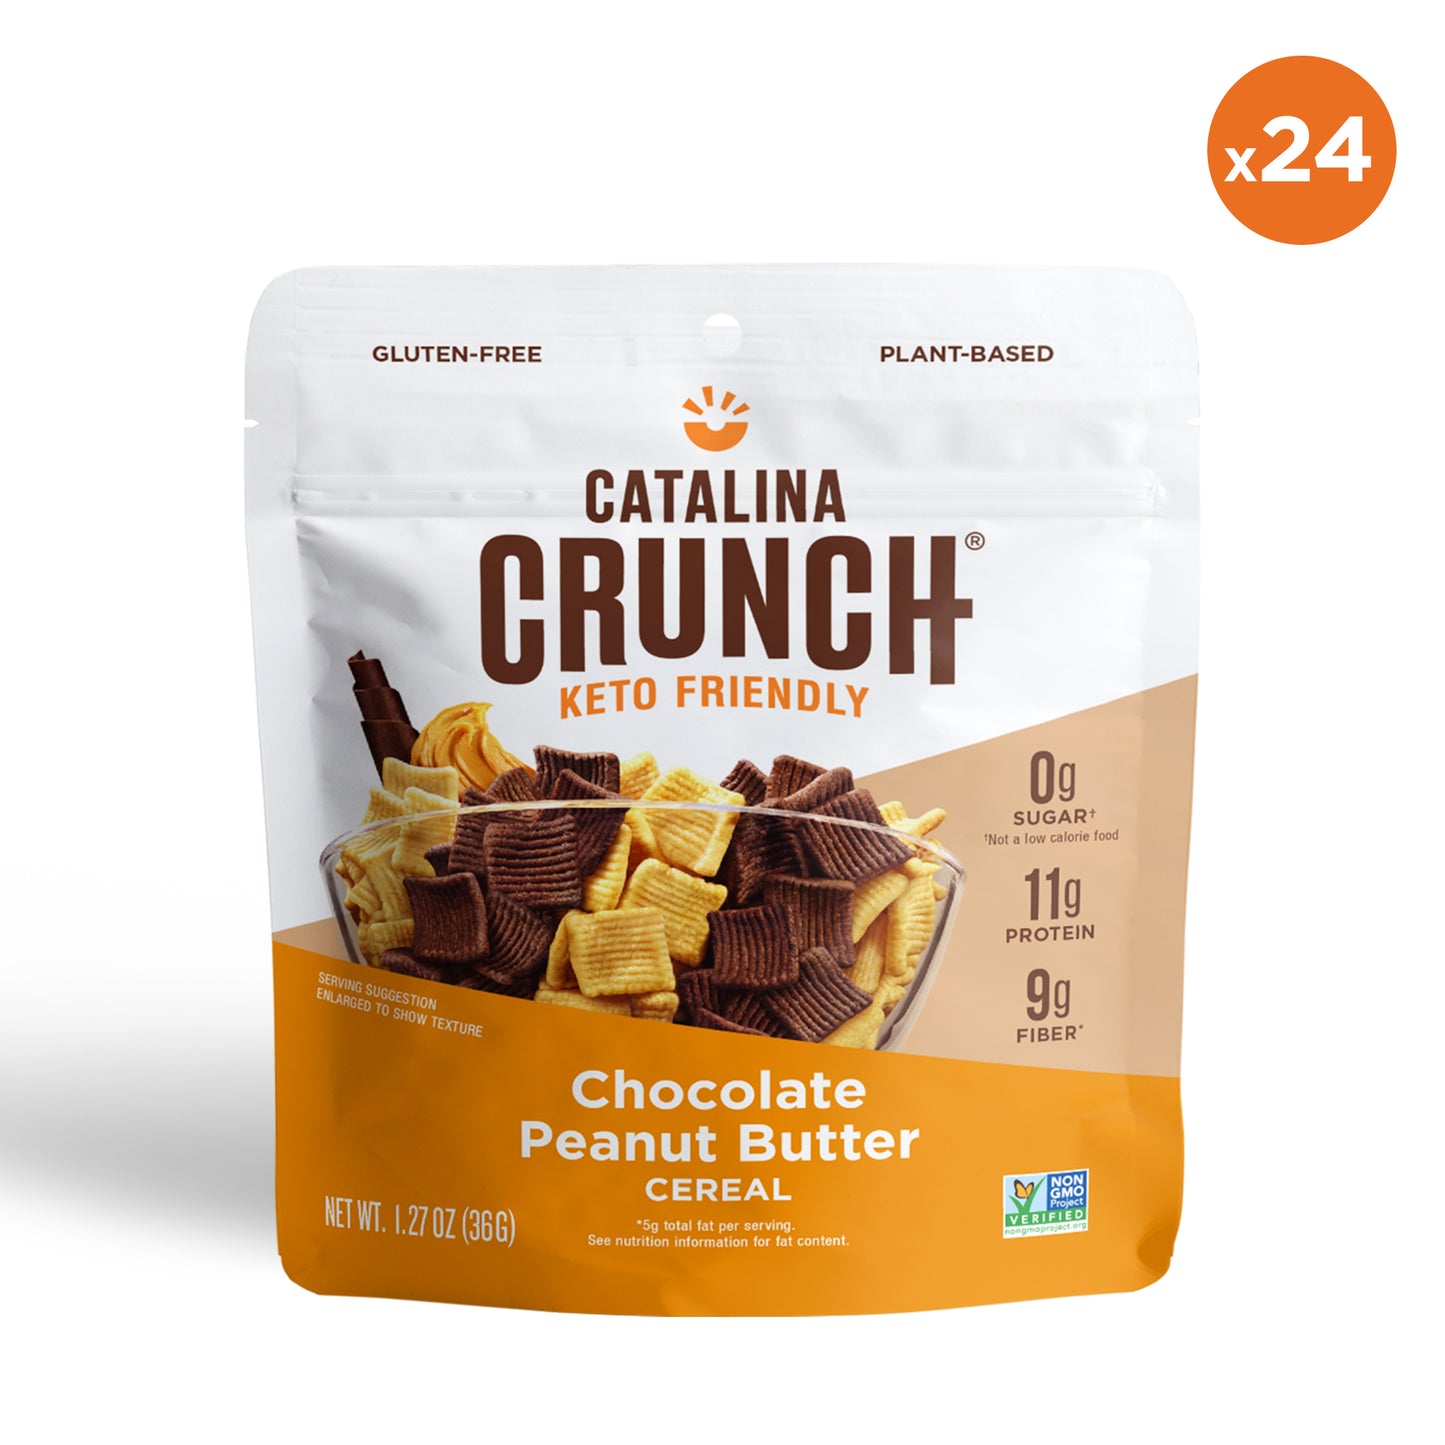 Single Serve Chocolate Peanut Butter Cereal 24-ct (2 POP Boxes of 12 - 1.27oz Pouches)